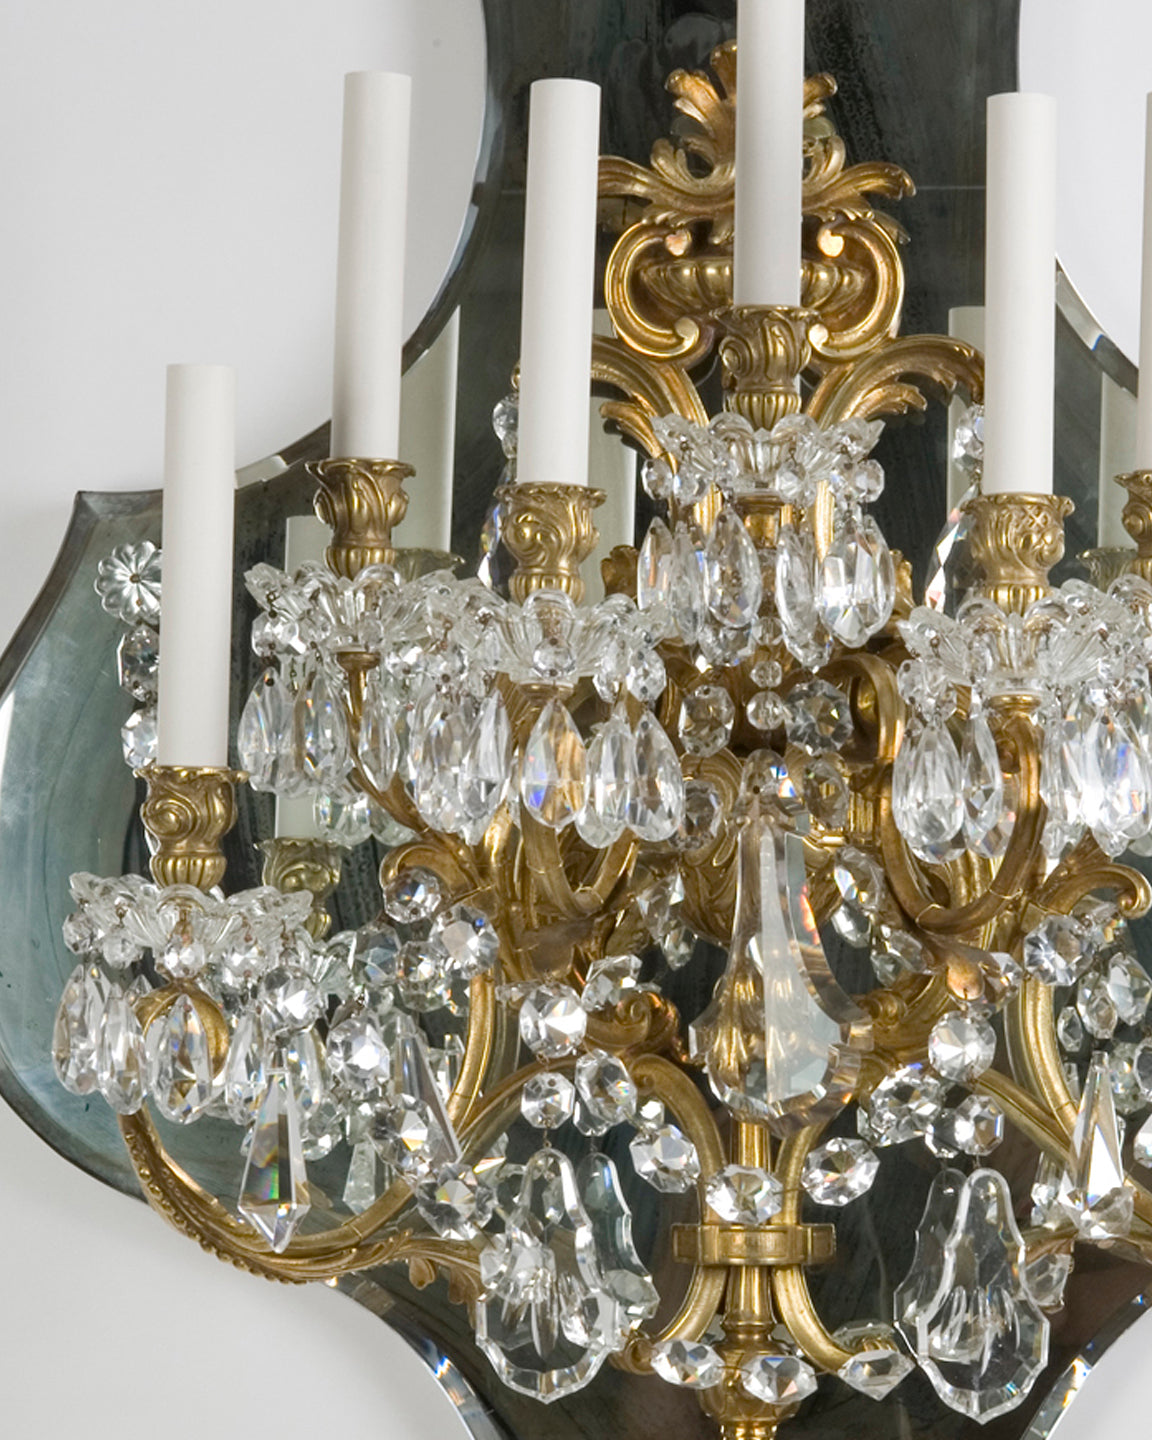 Mirrorback Sconces with Crystal Bobeches and Prisms